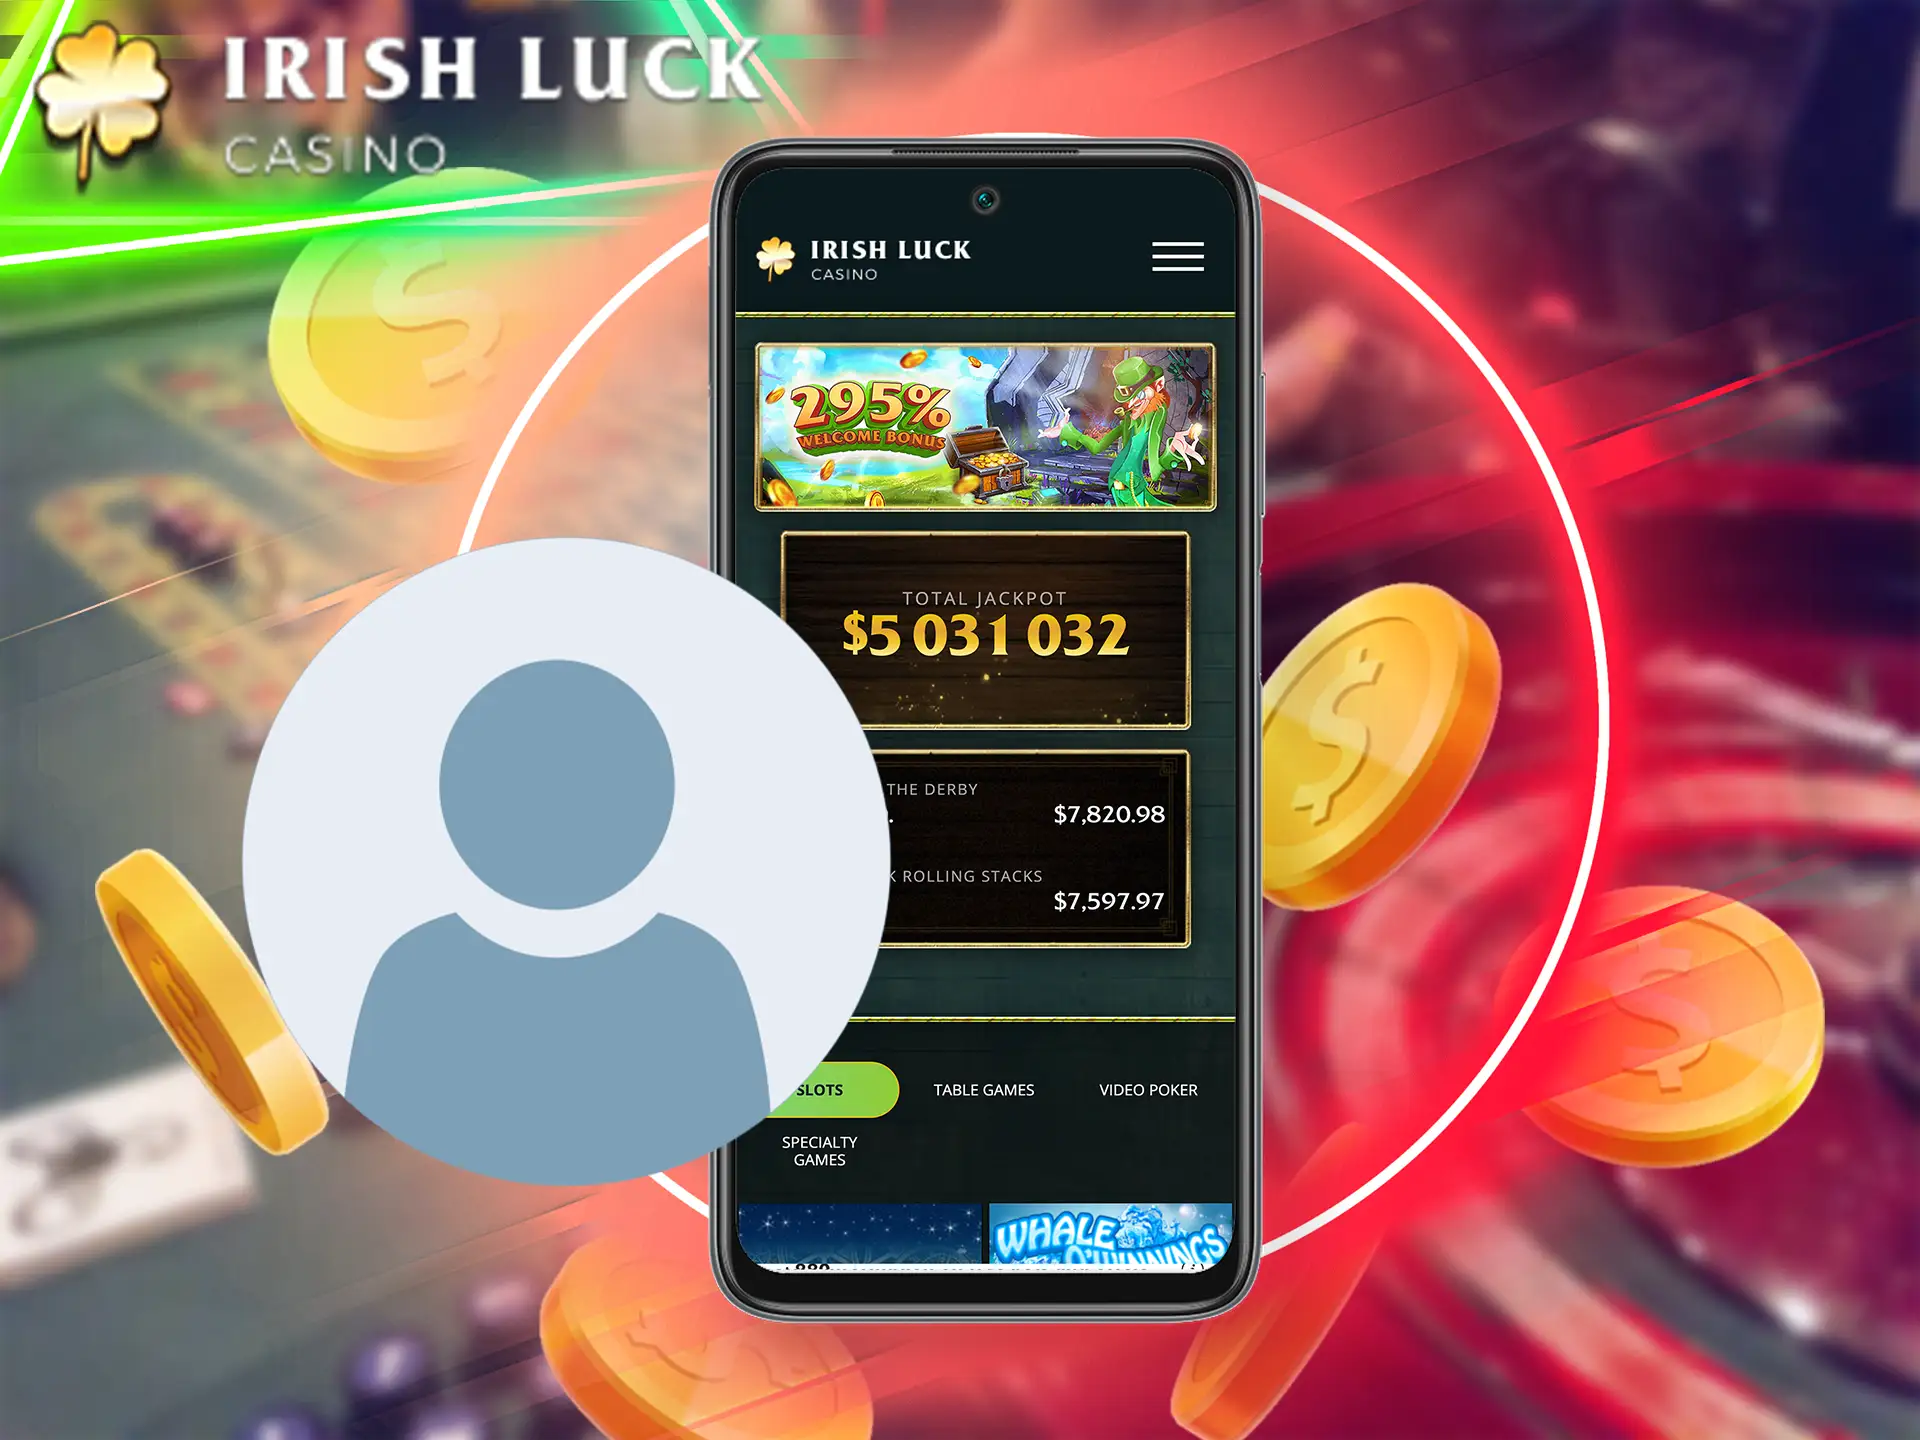 In order to start placing bets in Irish Luck all users must create an account, this rule is common for all players.